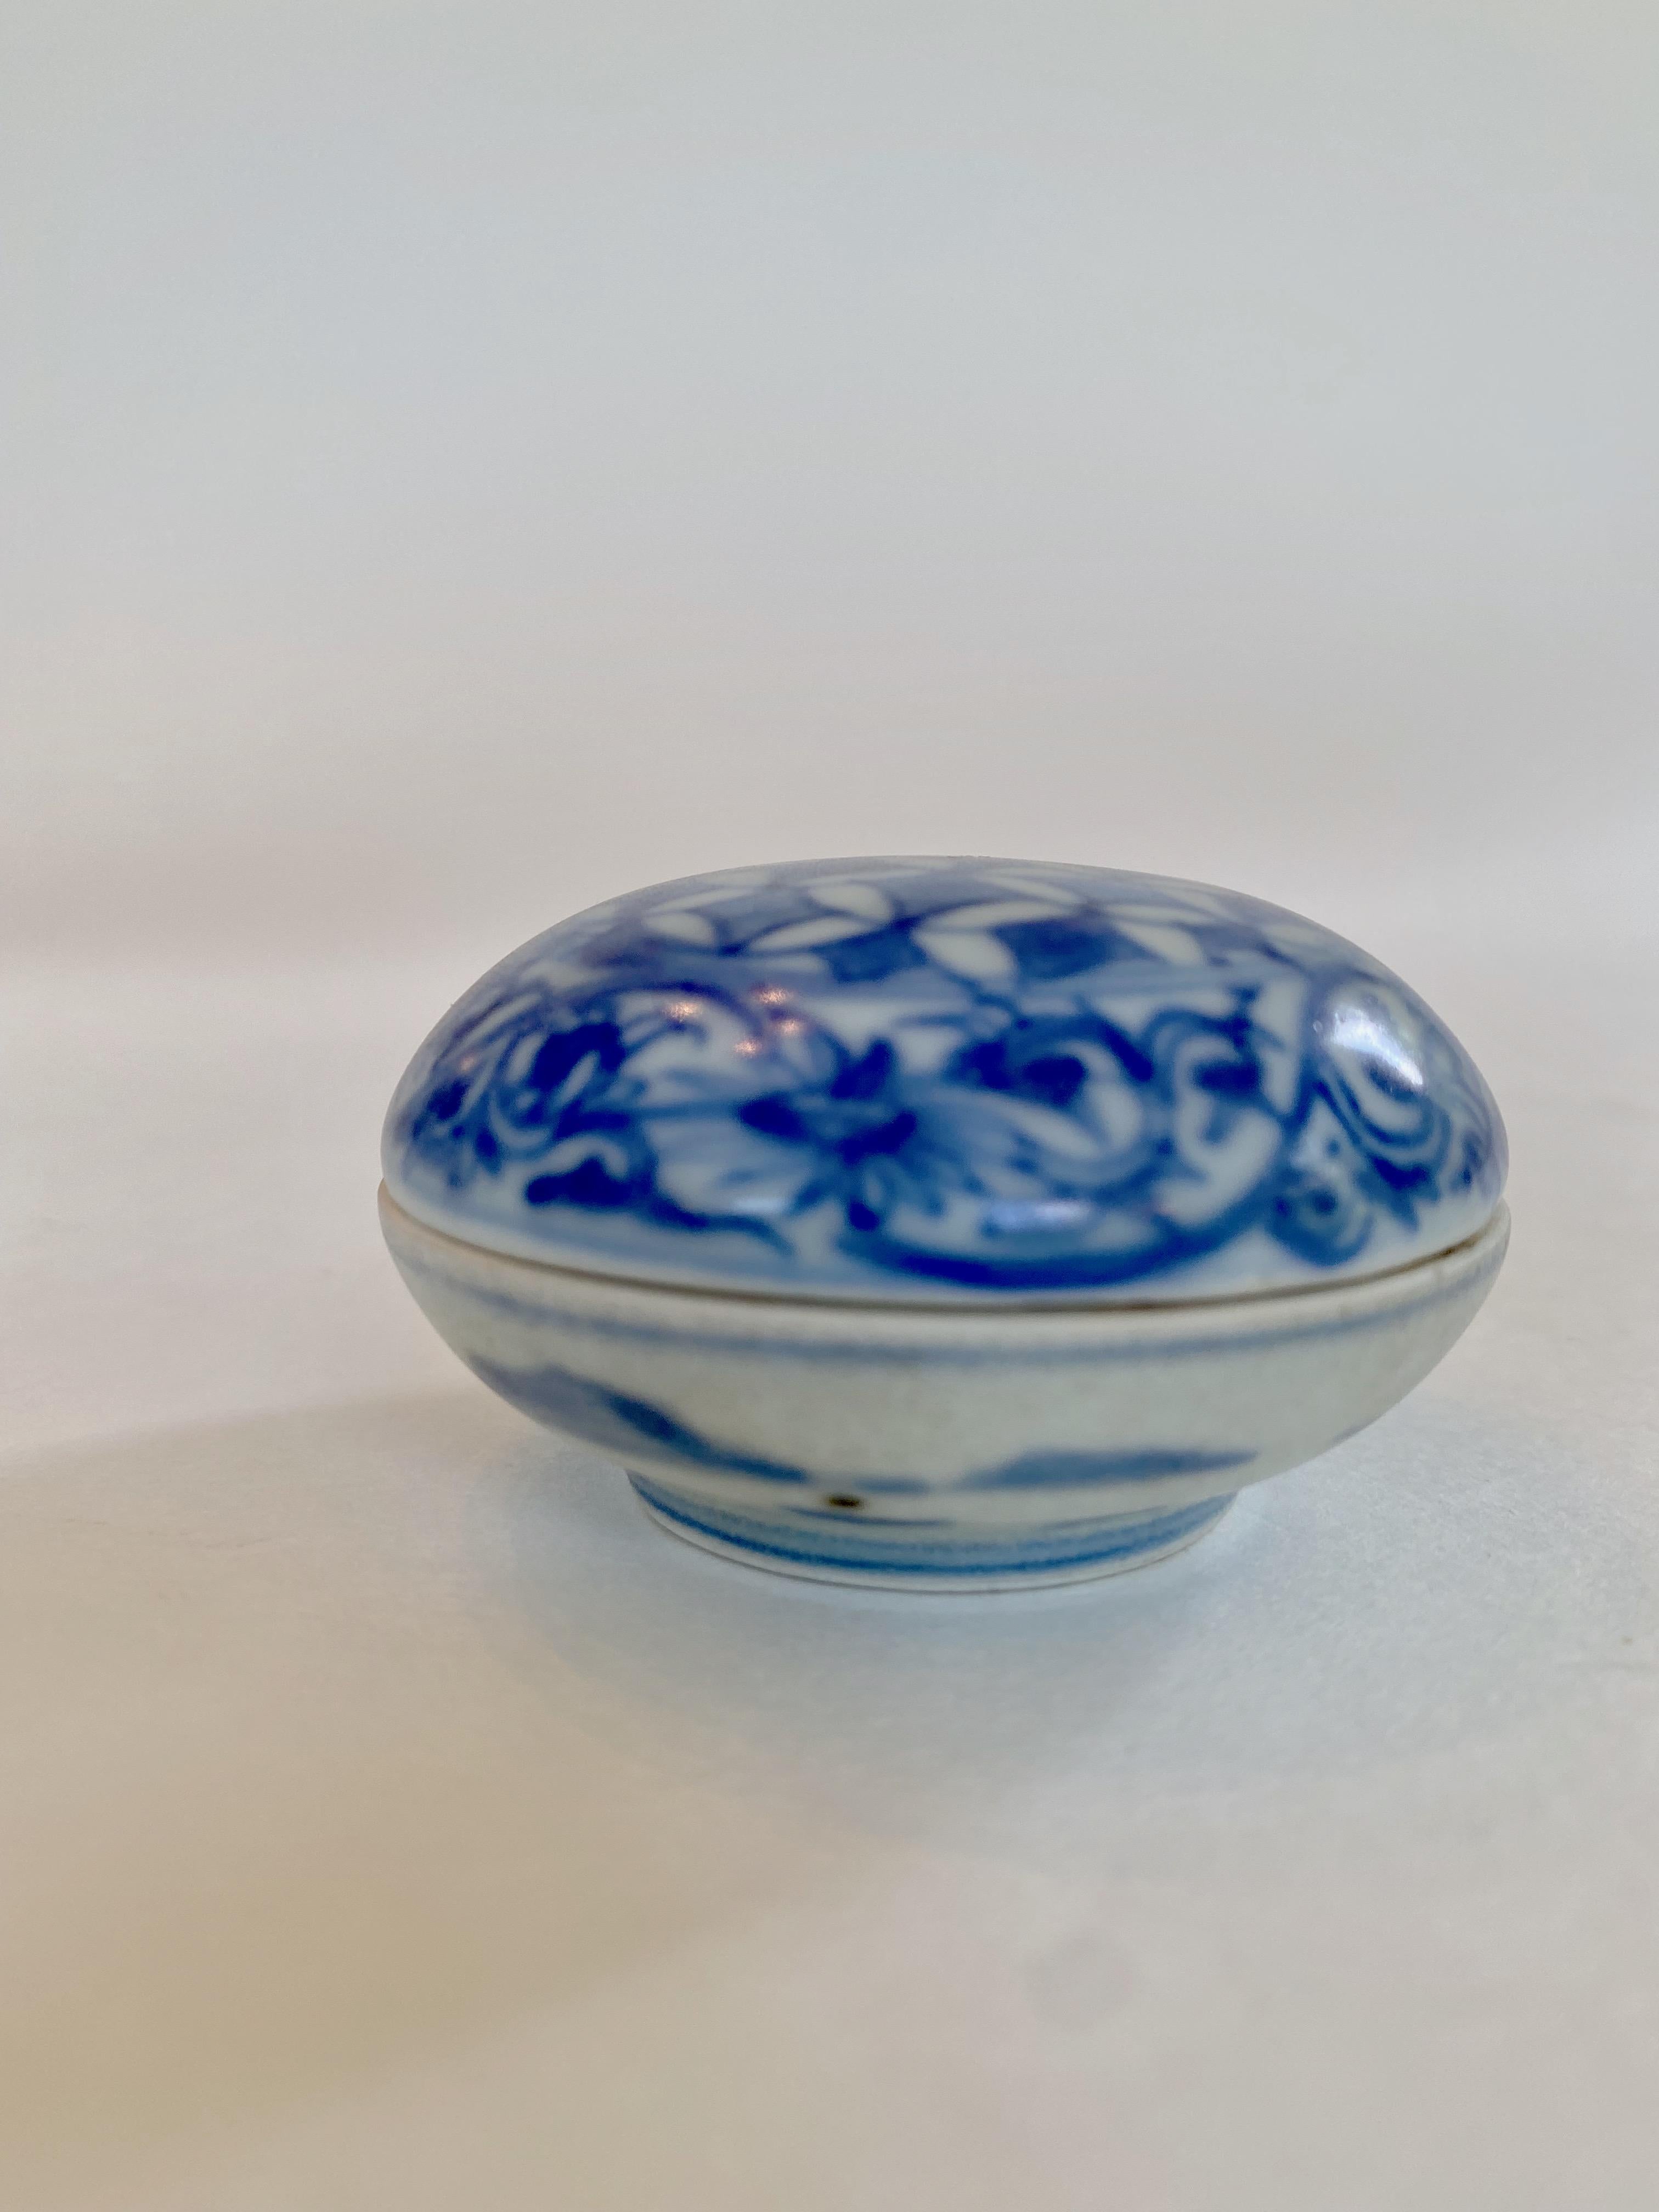 Hand-Painted Blue and White Porcelain Box from the Hatcher Collection (Item C)